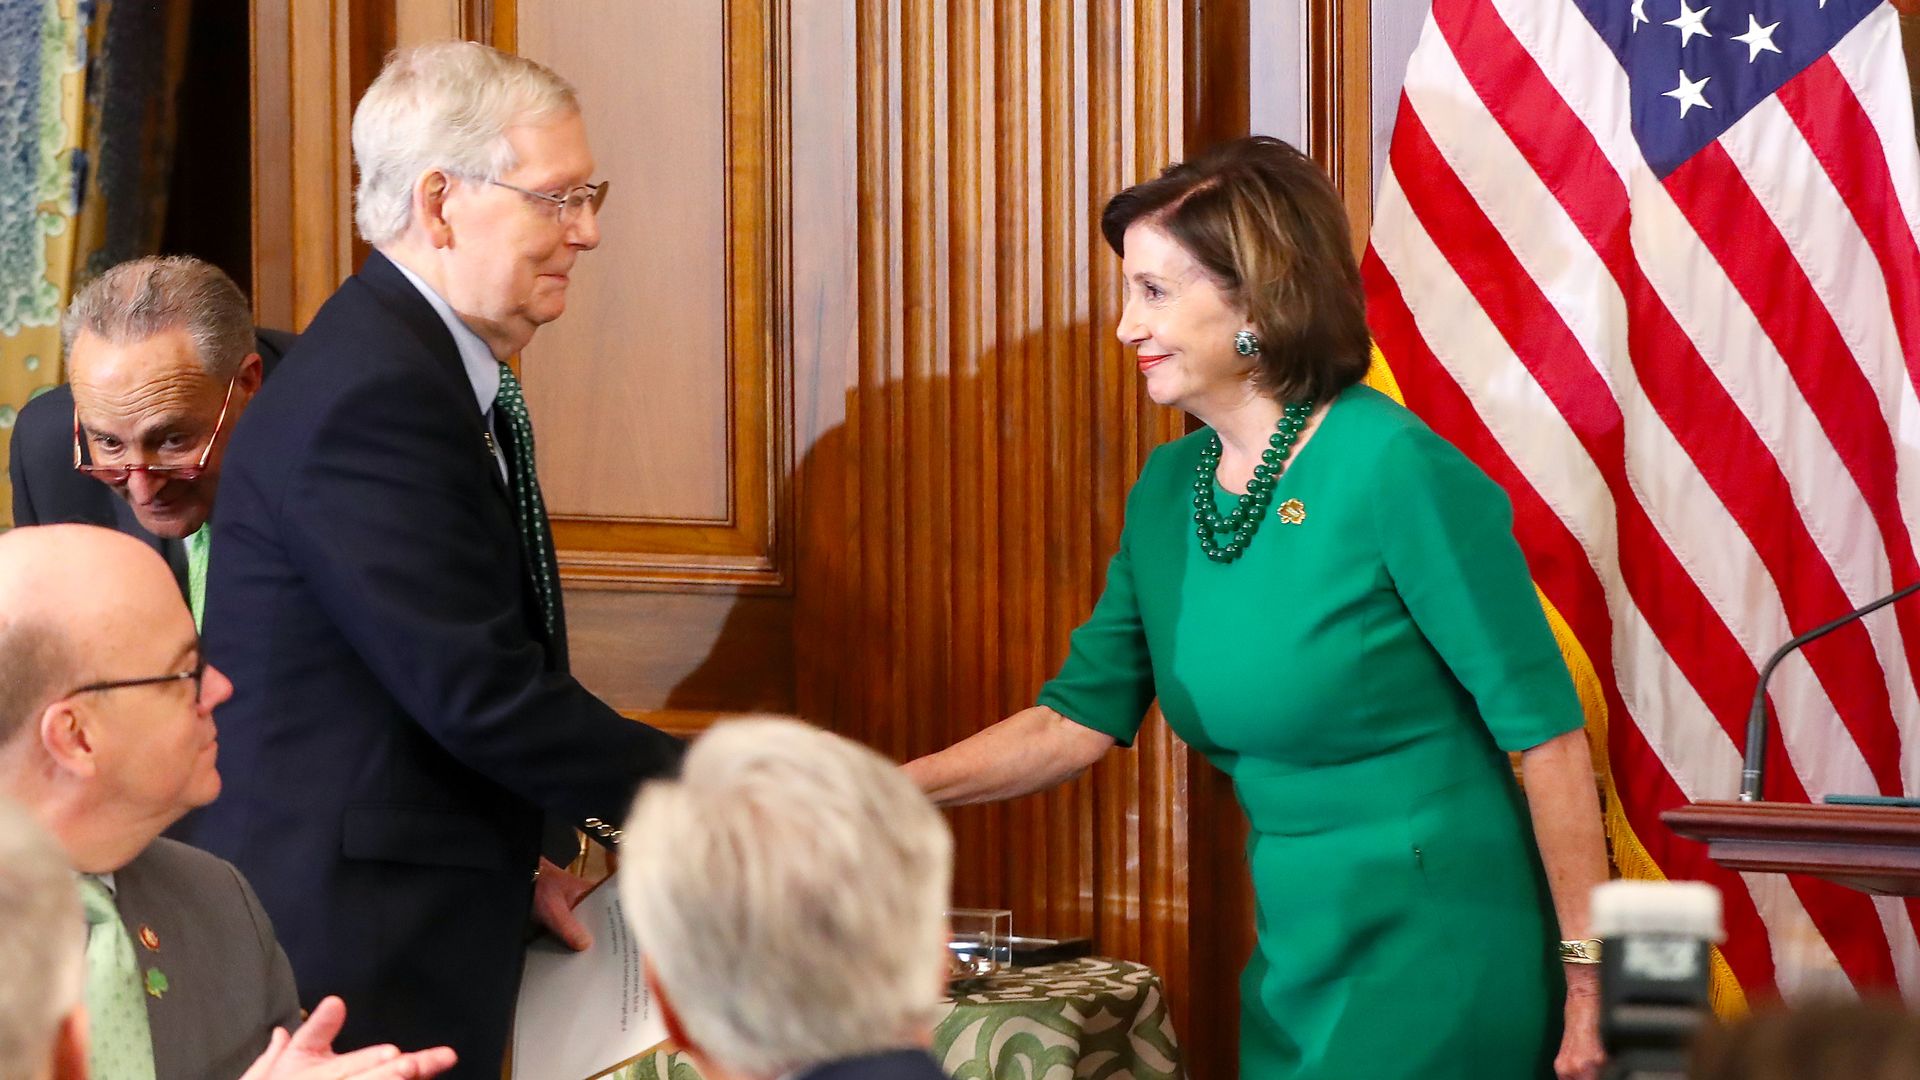 In this image, Pelosi and McCOnnell shake hands